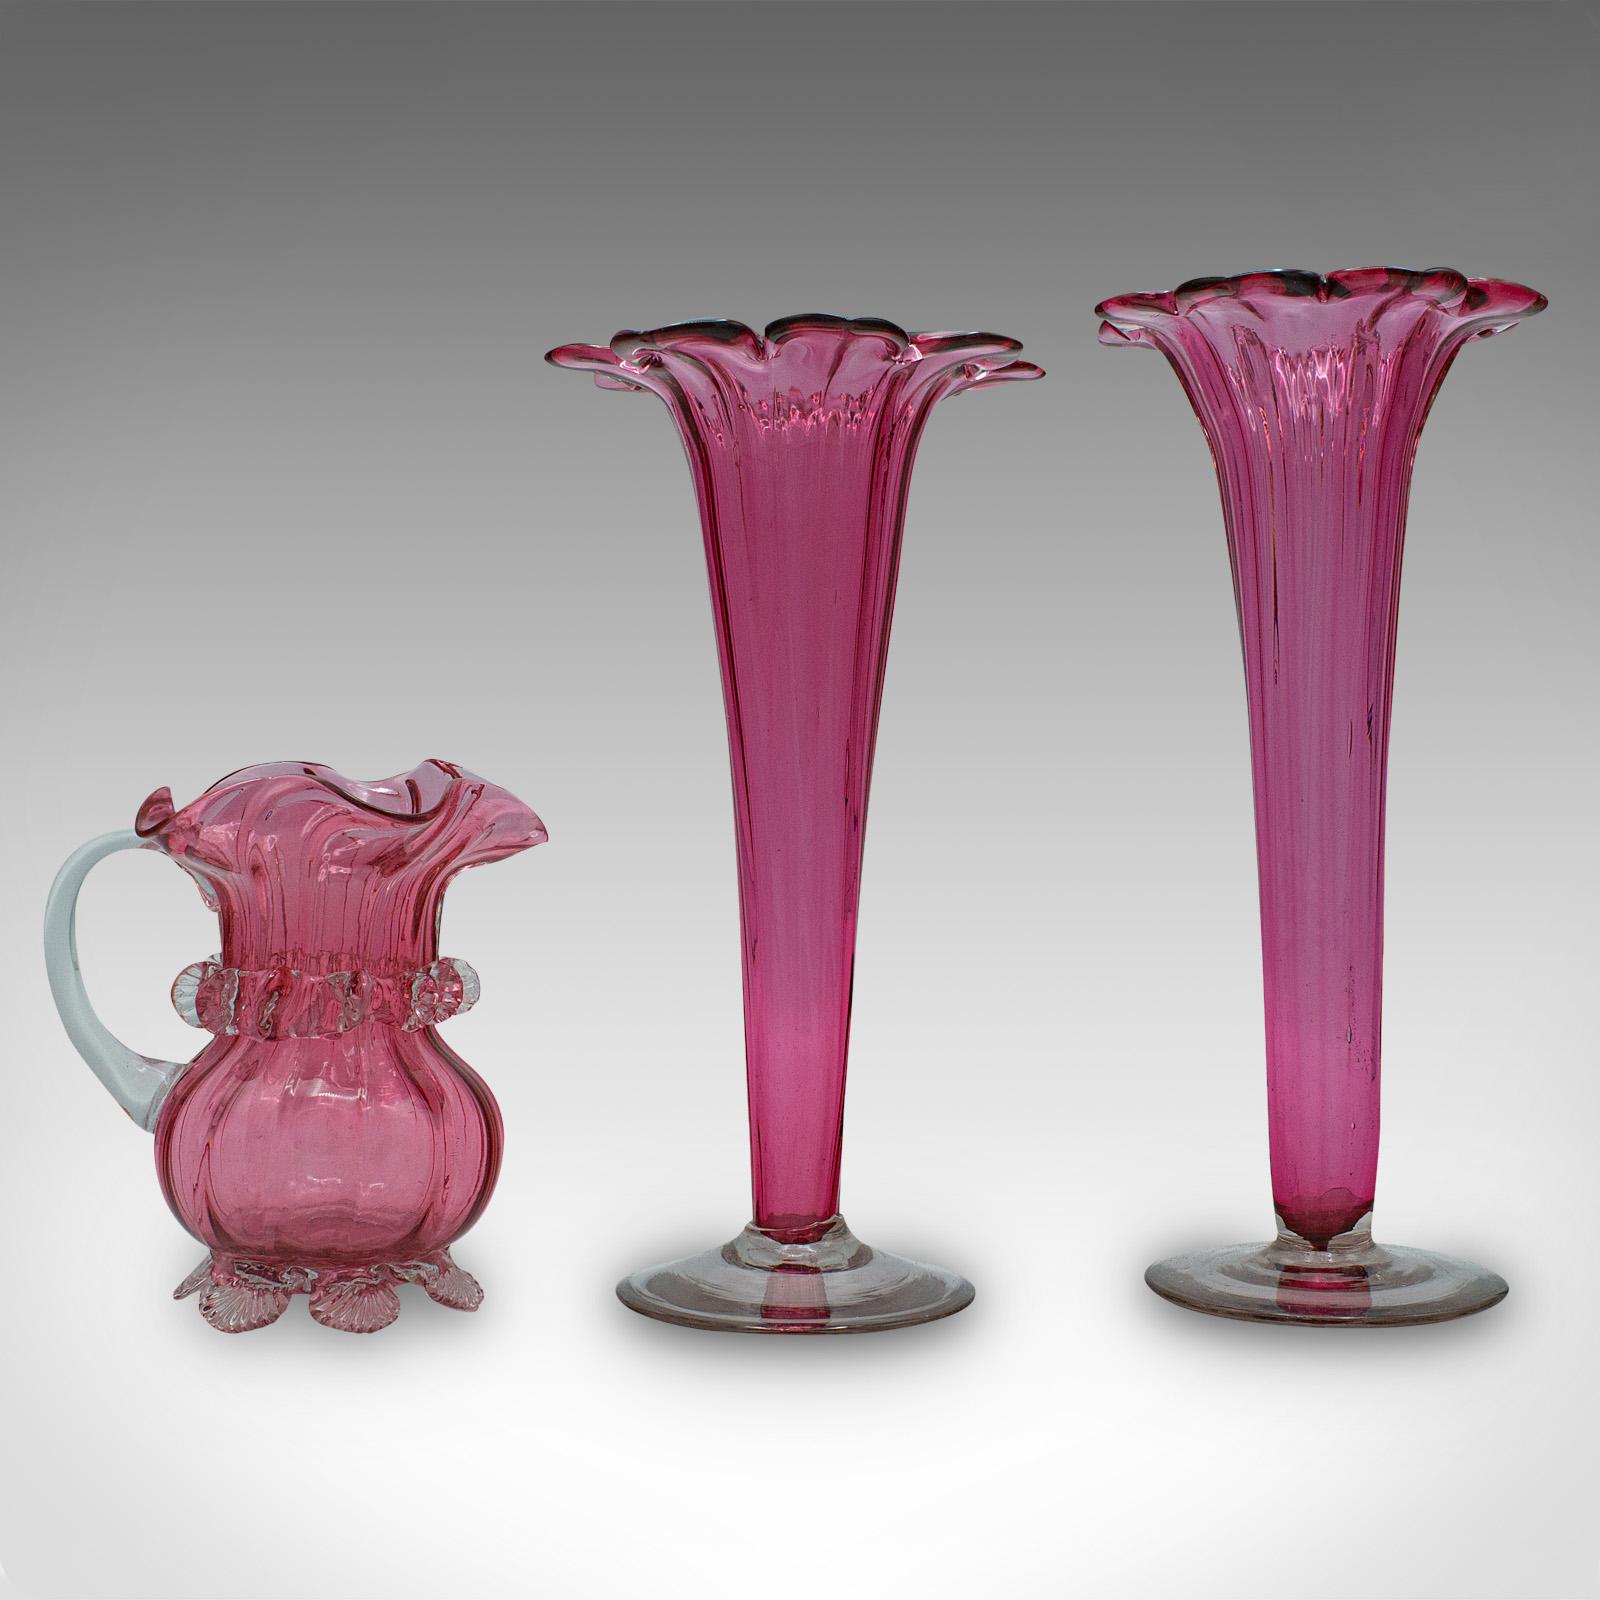 This is a vintage cranberry glass stem vase set. An English, decorative flower slip and replenishment jug, dating to the early 20th century, circa 1930.

Charmingly vibrant glass with delightful fluted forms
Displaying a desirable aged patina and